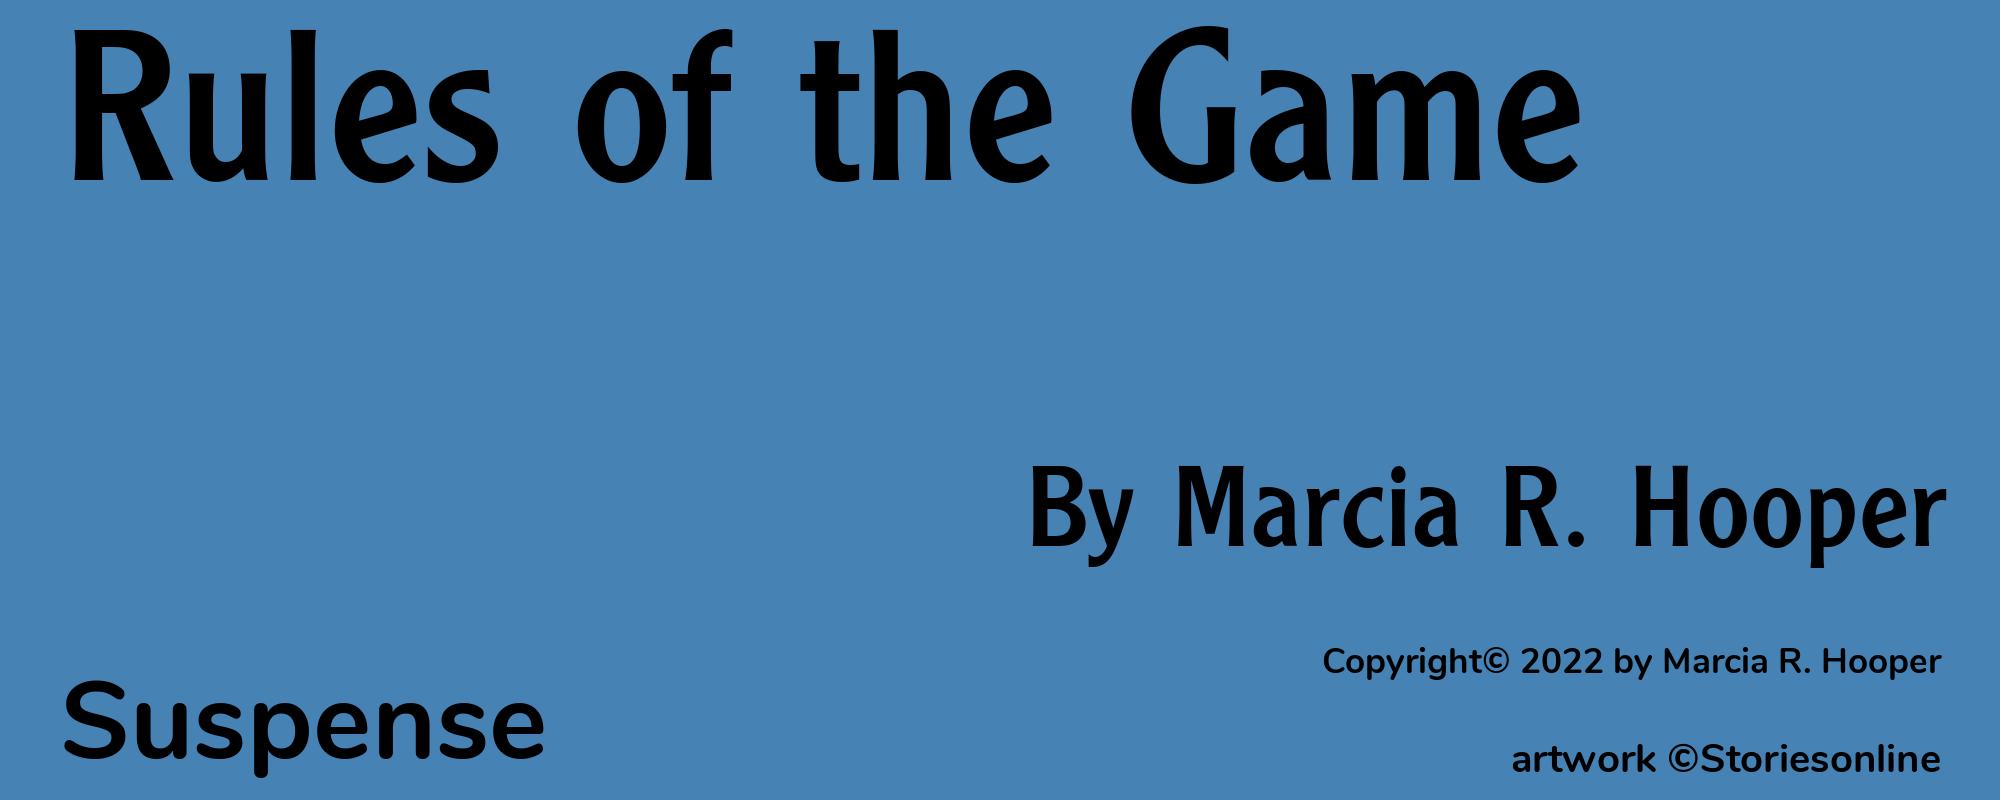 Rules of the Game - Cover